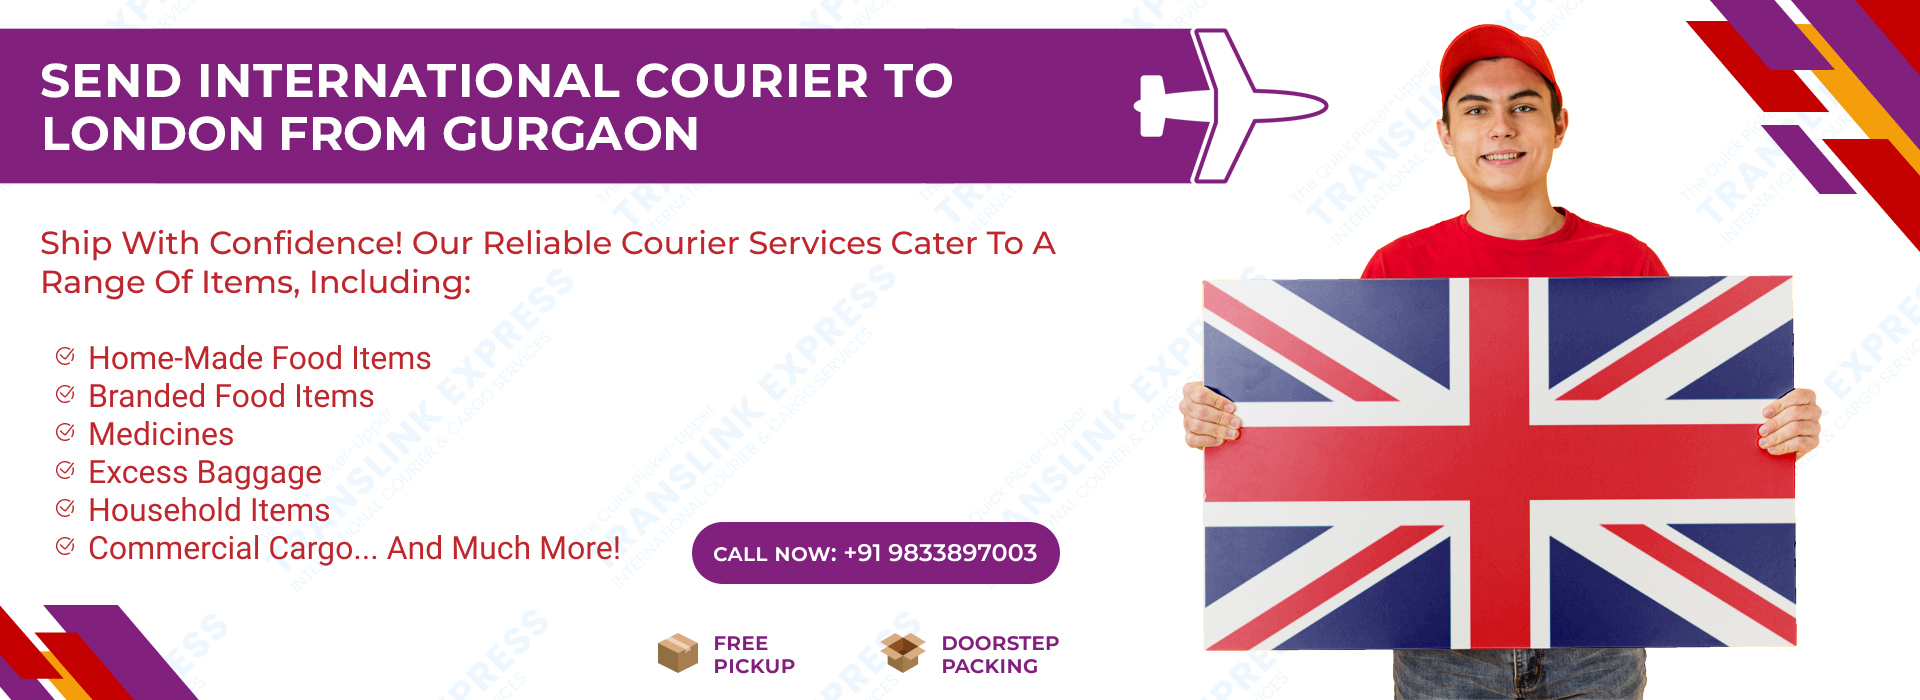 Courier to London From Gurgaon